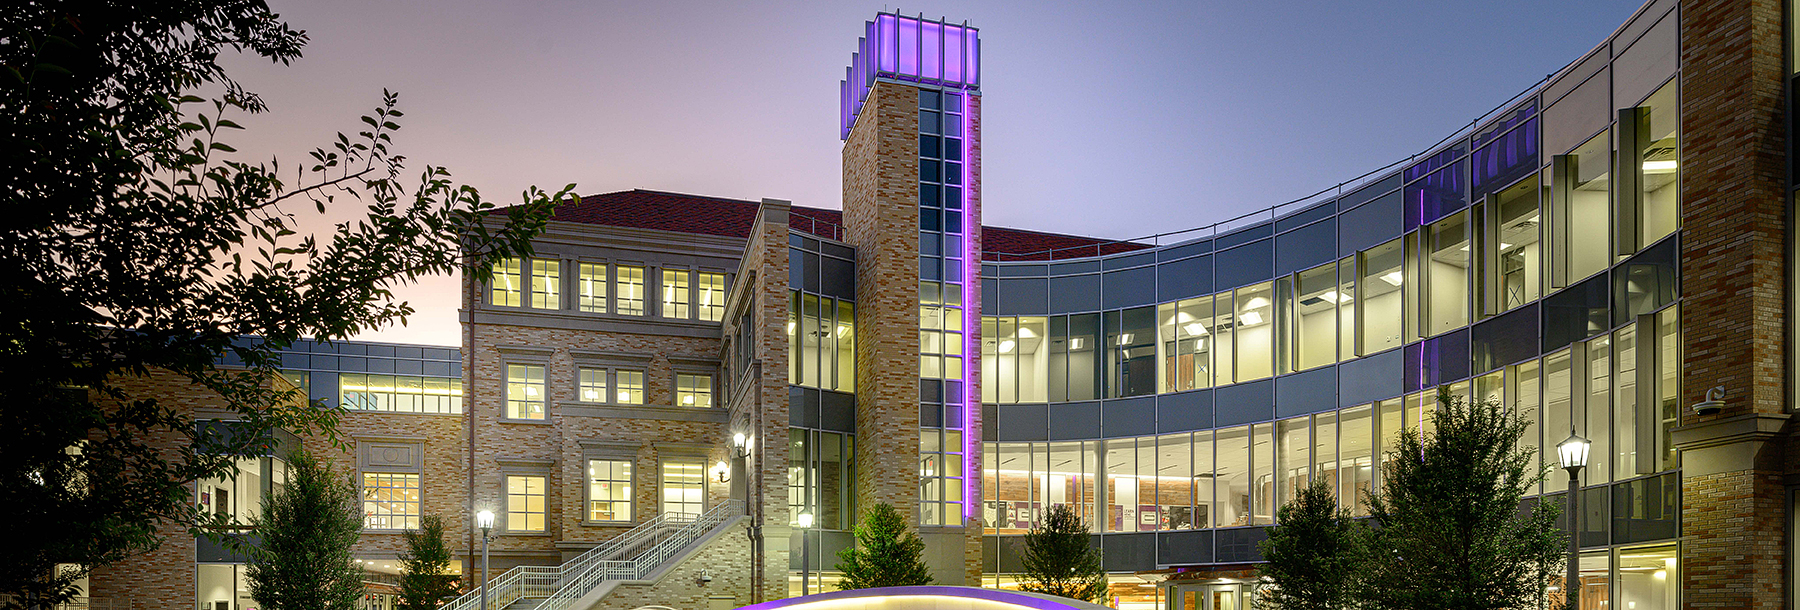 Section Image: Neeley School of Business at twilight 